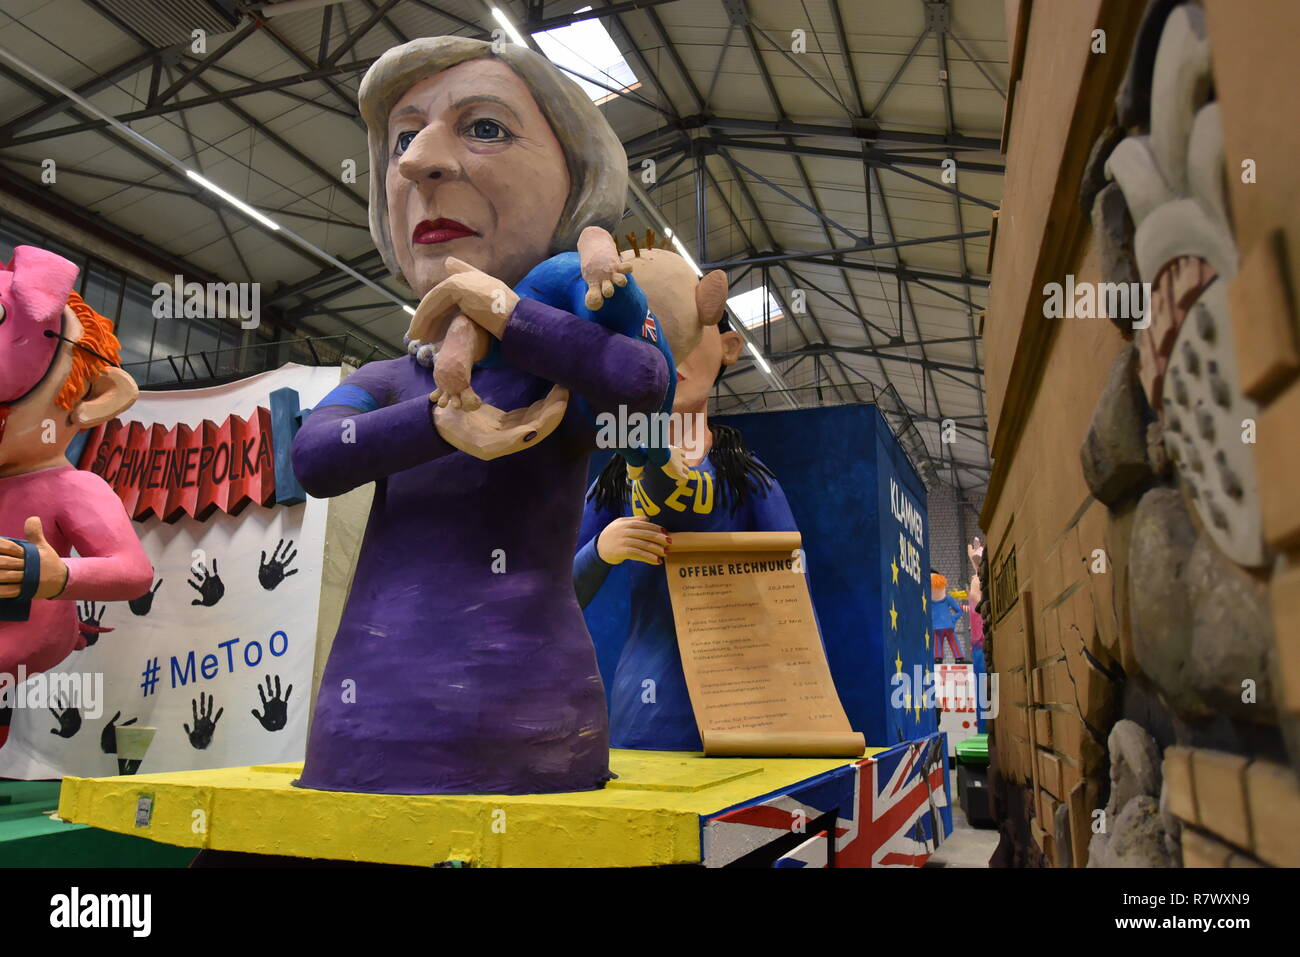 A Brexit float pictured during the presentation ceremony of the commemorative floats for the Cologne Carnival Parade 2018 in Cologne, Germany, 06 February 2018. Floats are unveiled for the first time during this ceremony ahead of their parade through the streets of Cologne on Shrove Monday. Photo: Horst Galuschka/dpa | usage worldwide Stock Photo